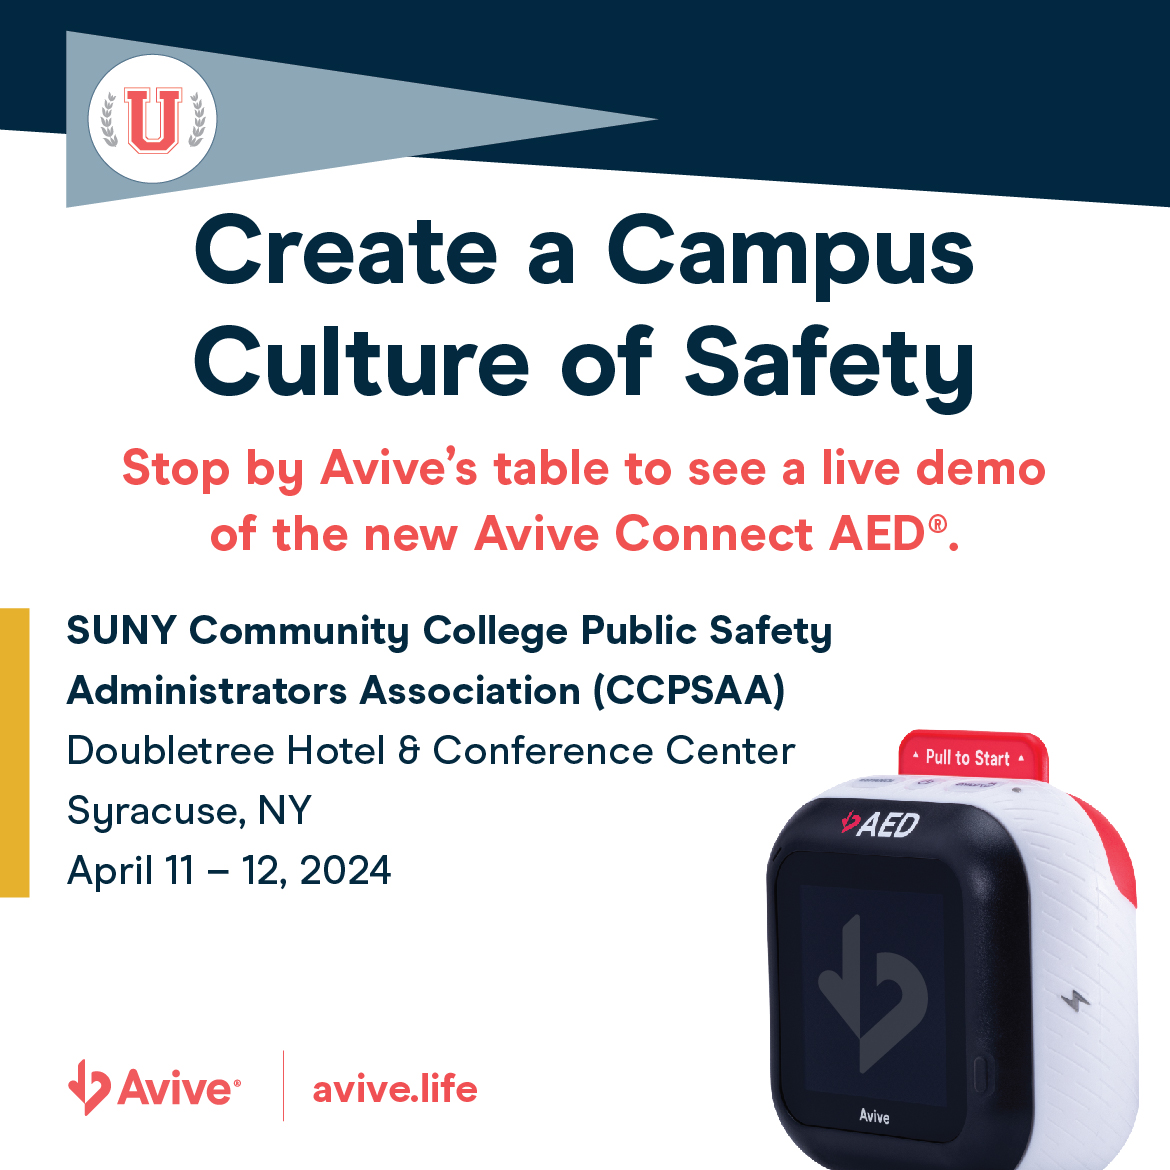 Community colleges in the #SUNY system are hopping on board! 

Come see us in New York and learn what we can do for your campus. #publicsafety #communitycolleges #safety #cardiacarrest #nystate